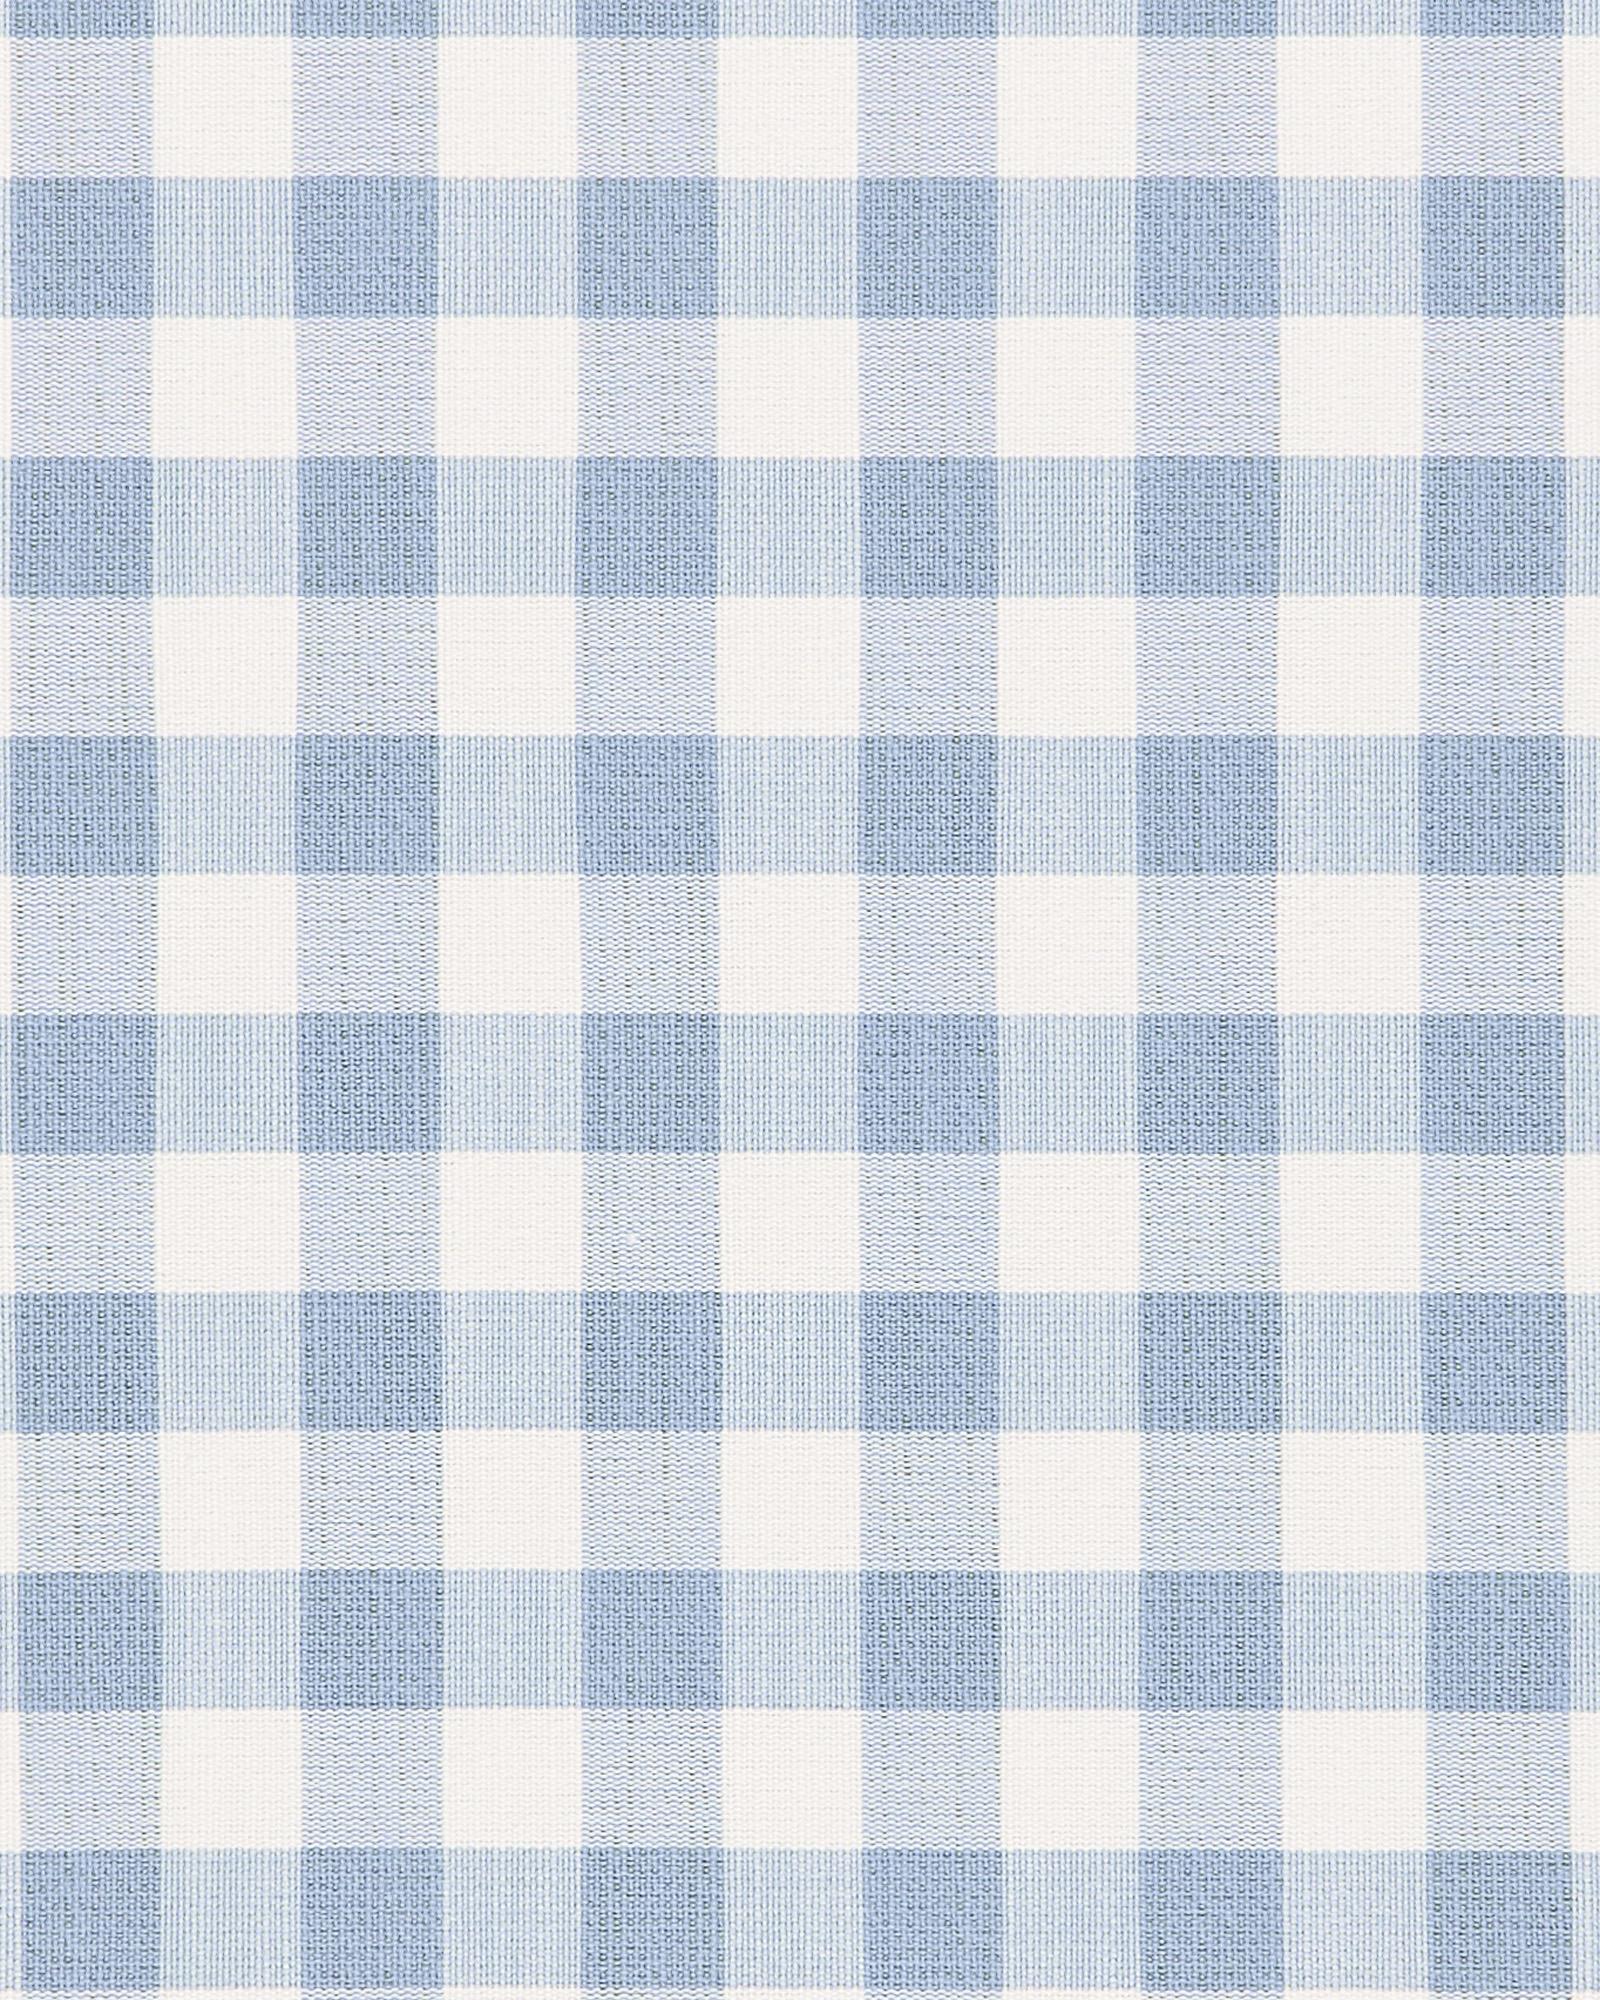 Gingham bedding is the timeless must-have of the year